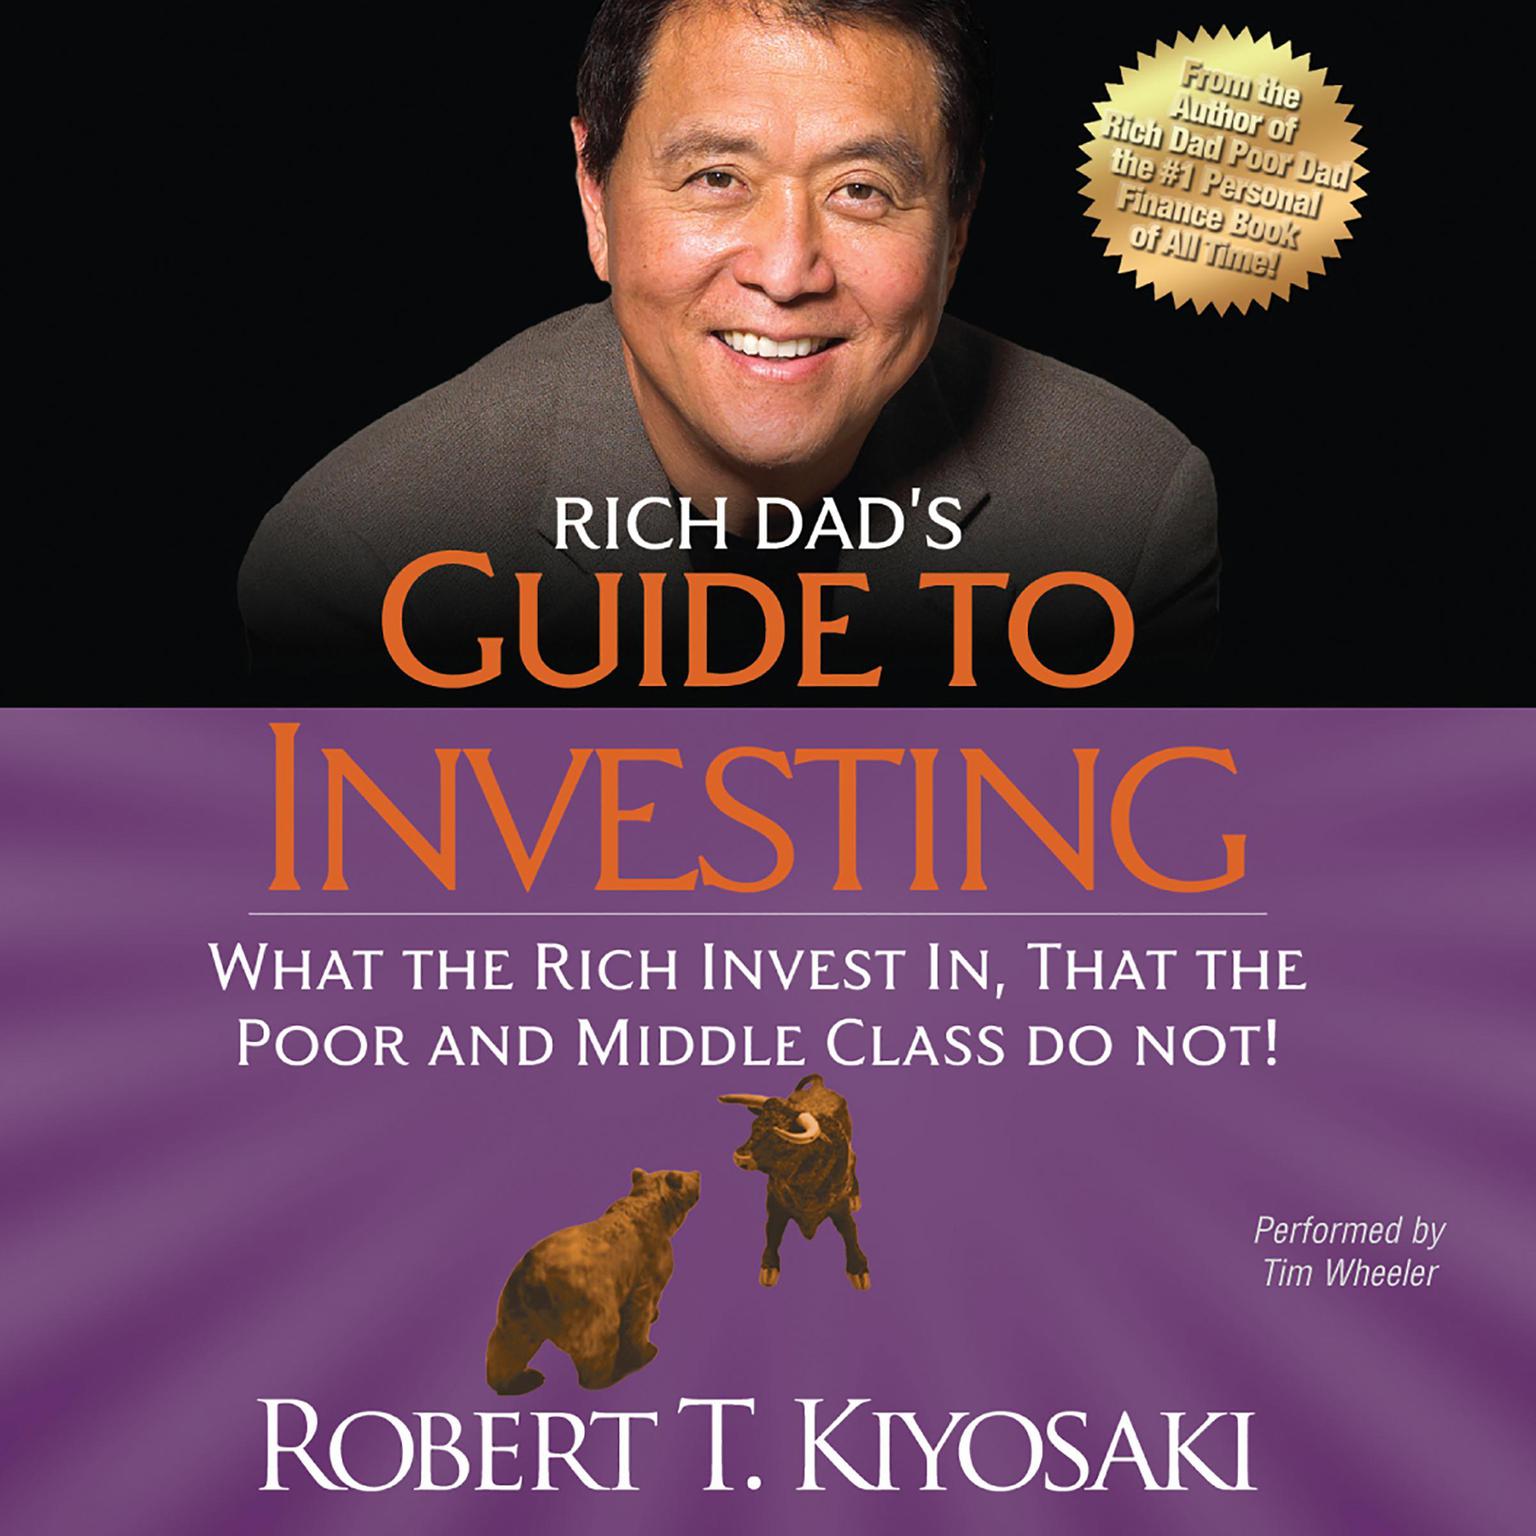 Rich Dad’s Guide to Investing: What the Rich Invest In, That the Poor and Middle Class Do Not! Audiobook, by Robert T. Kiyosaki